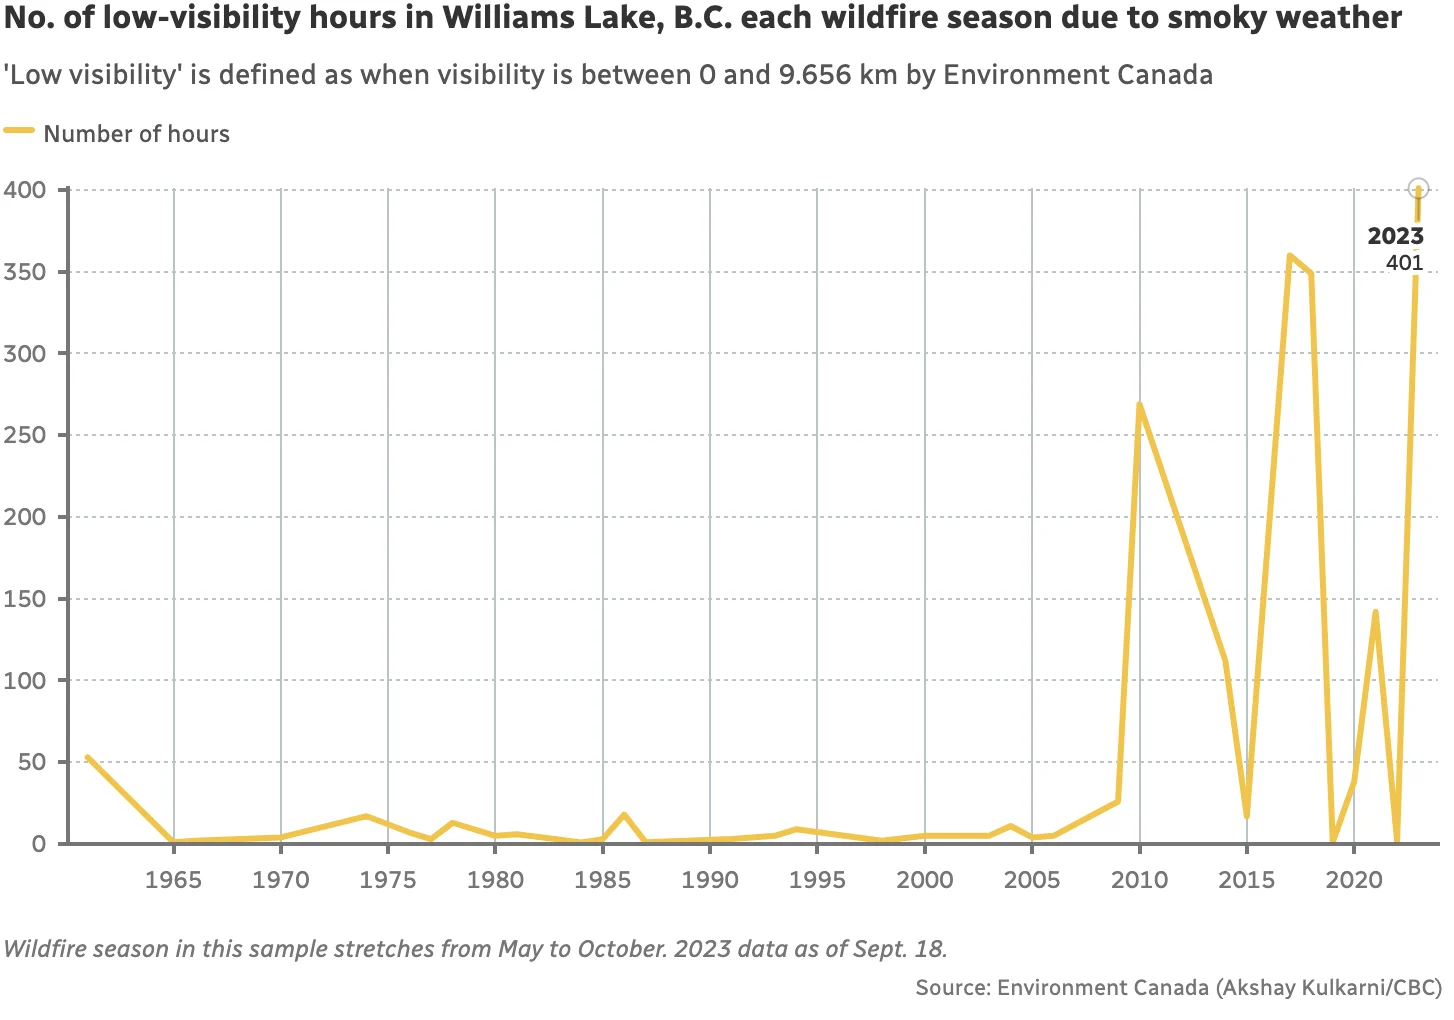 CBC: No. of low-visibility hours in Williams Lake, B.C. each wildfire season due to smoky weather